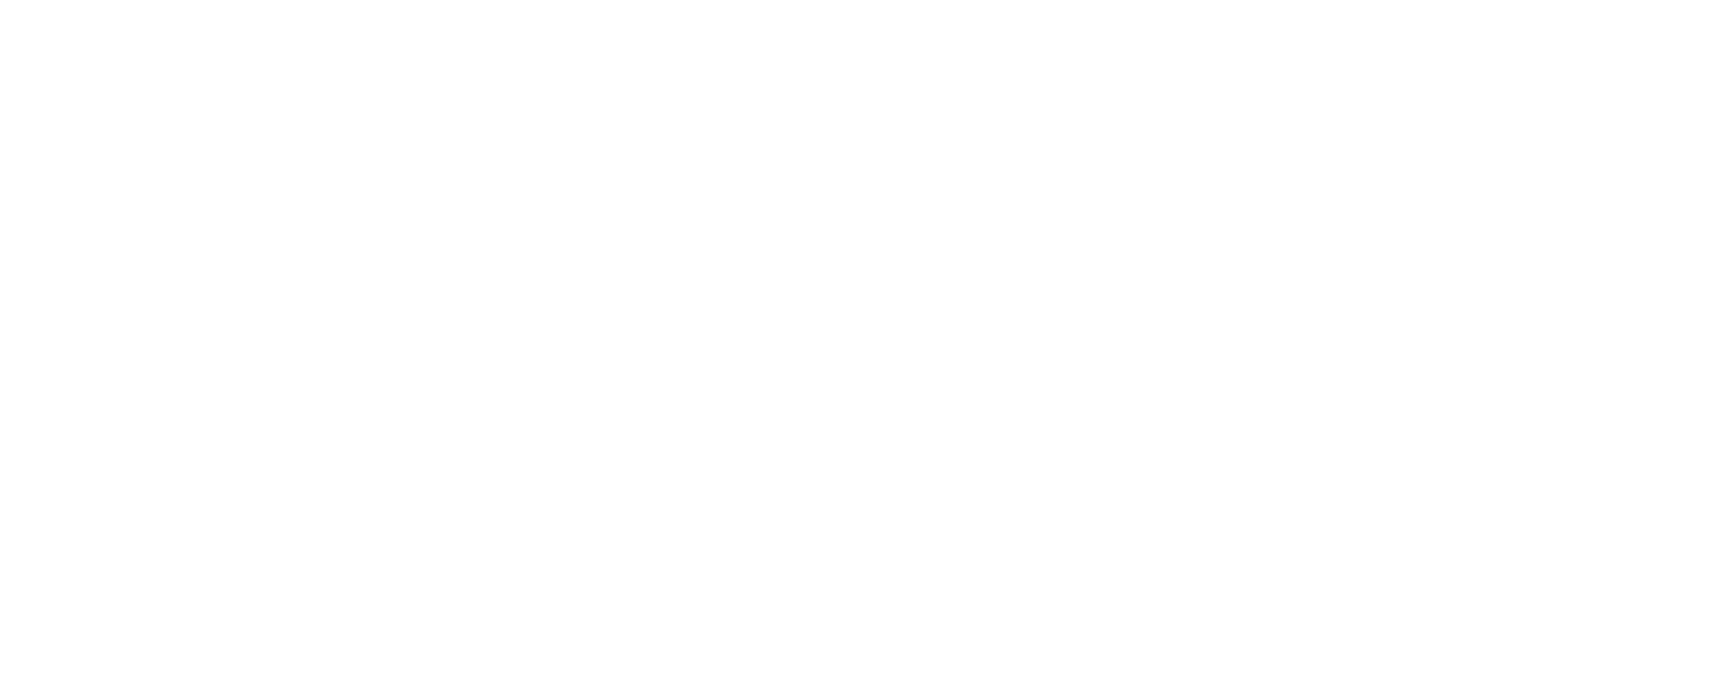 This bay is Andrew’s